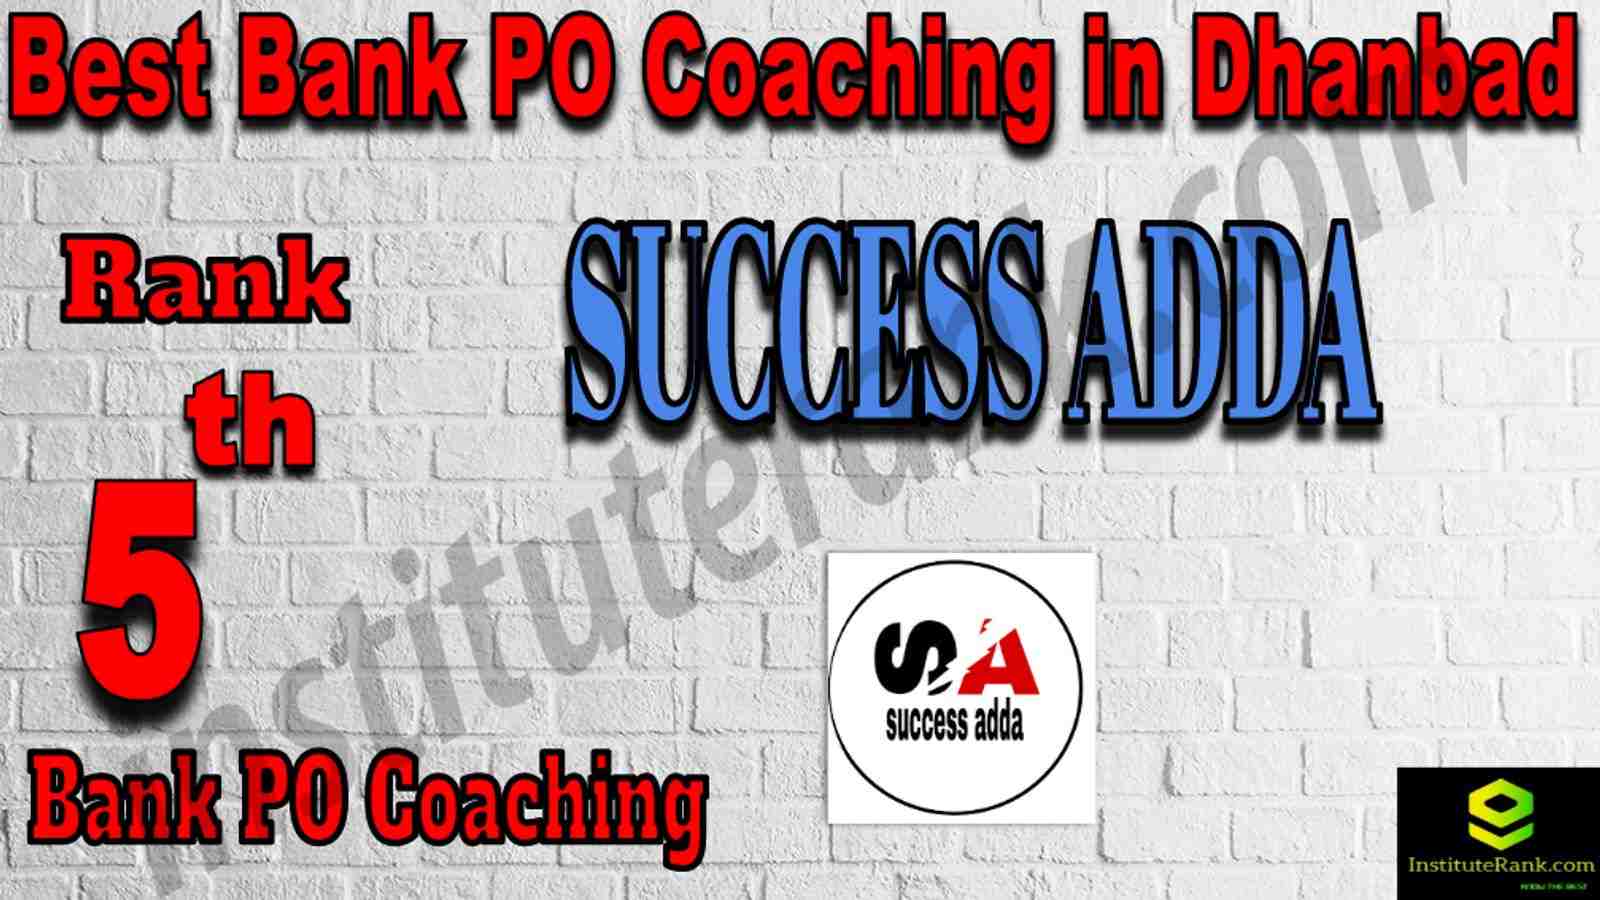 5th Best Bank PO Coaching in Dhanbad